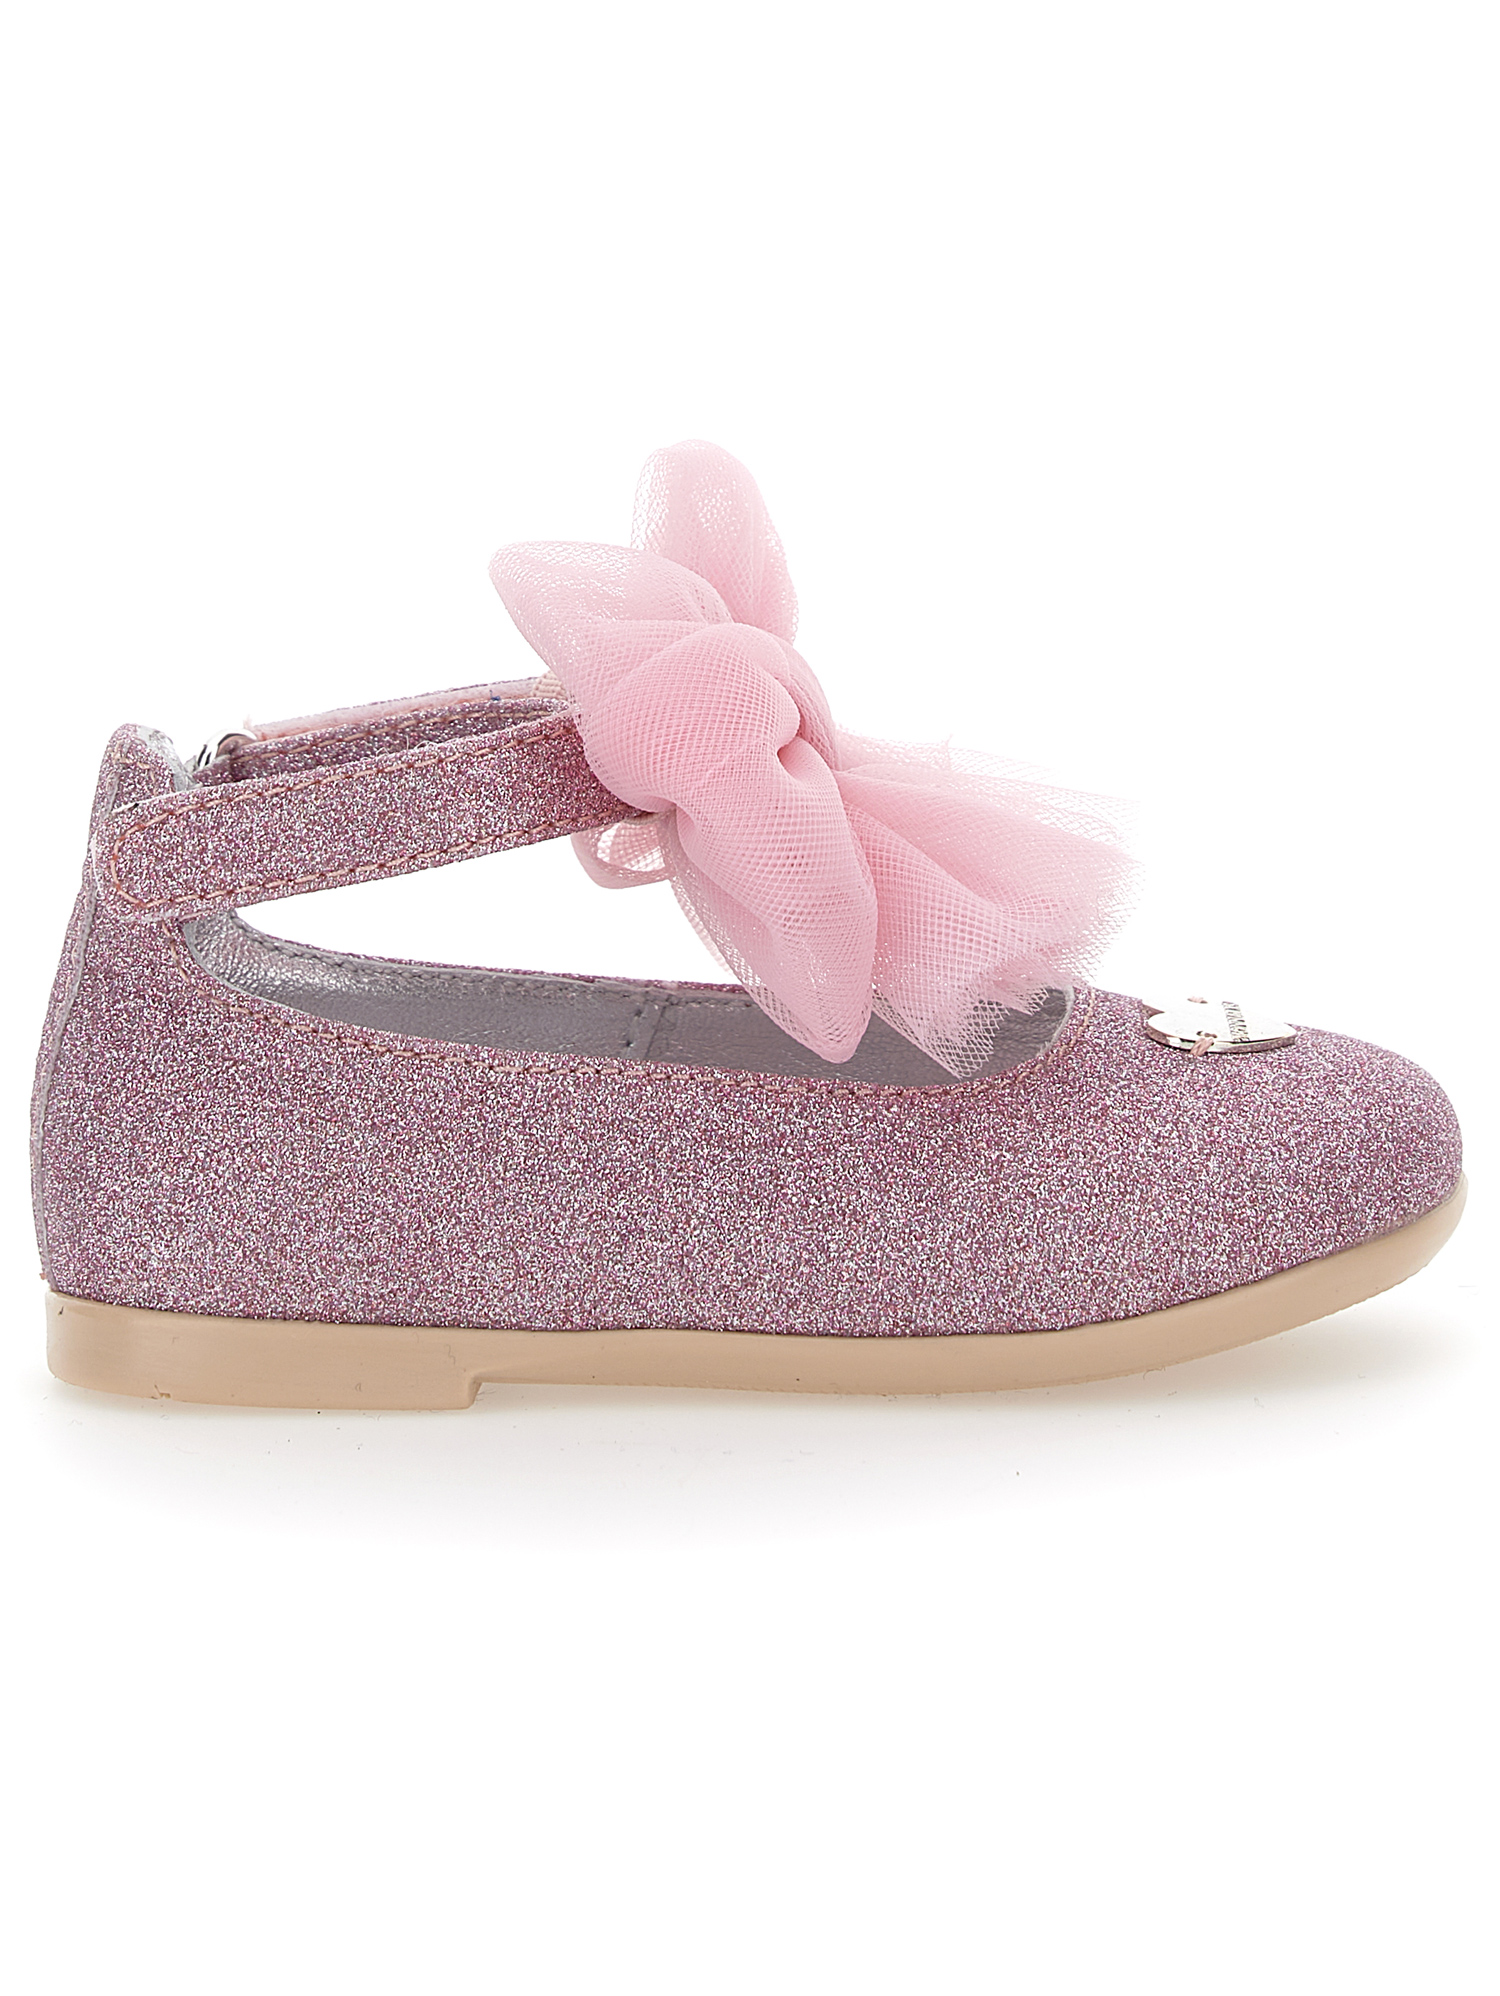 Monnalisa Glitter Ballet Flats With Bows In Dusty Pink Rose